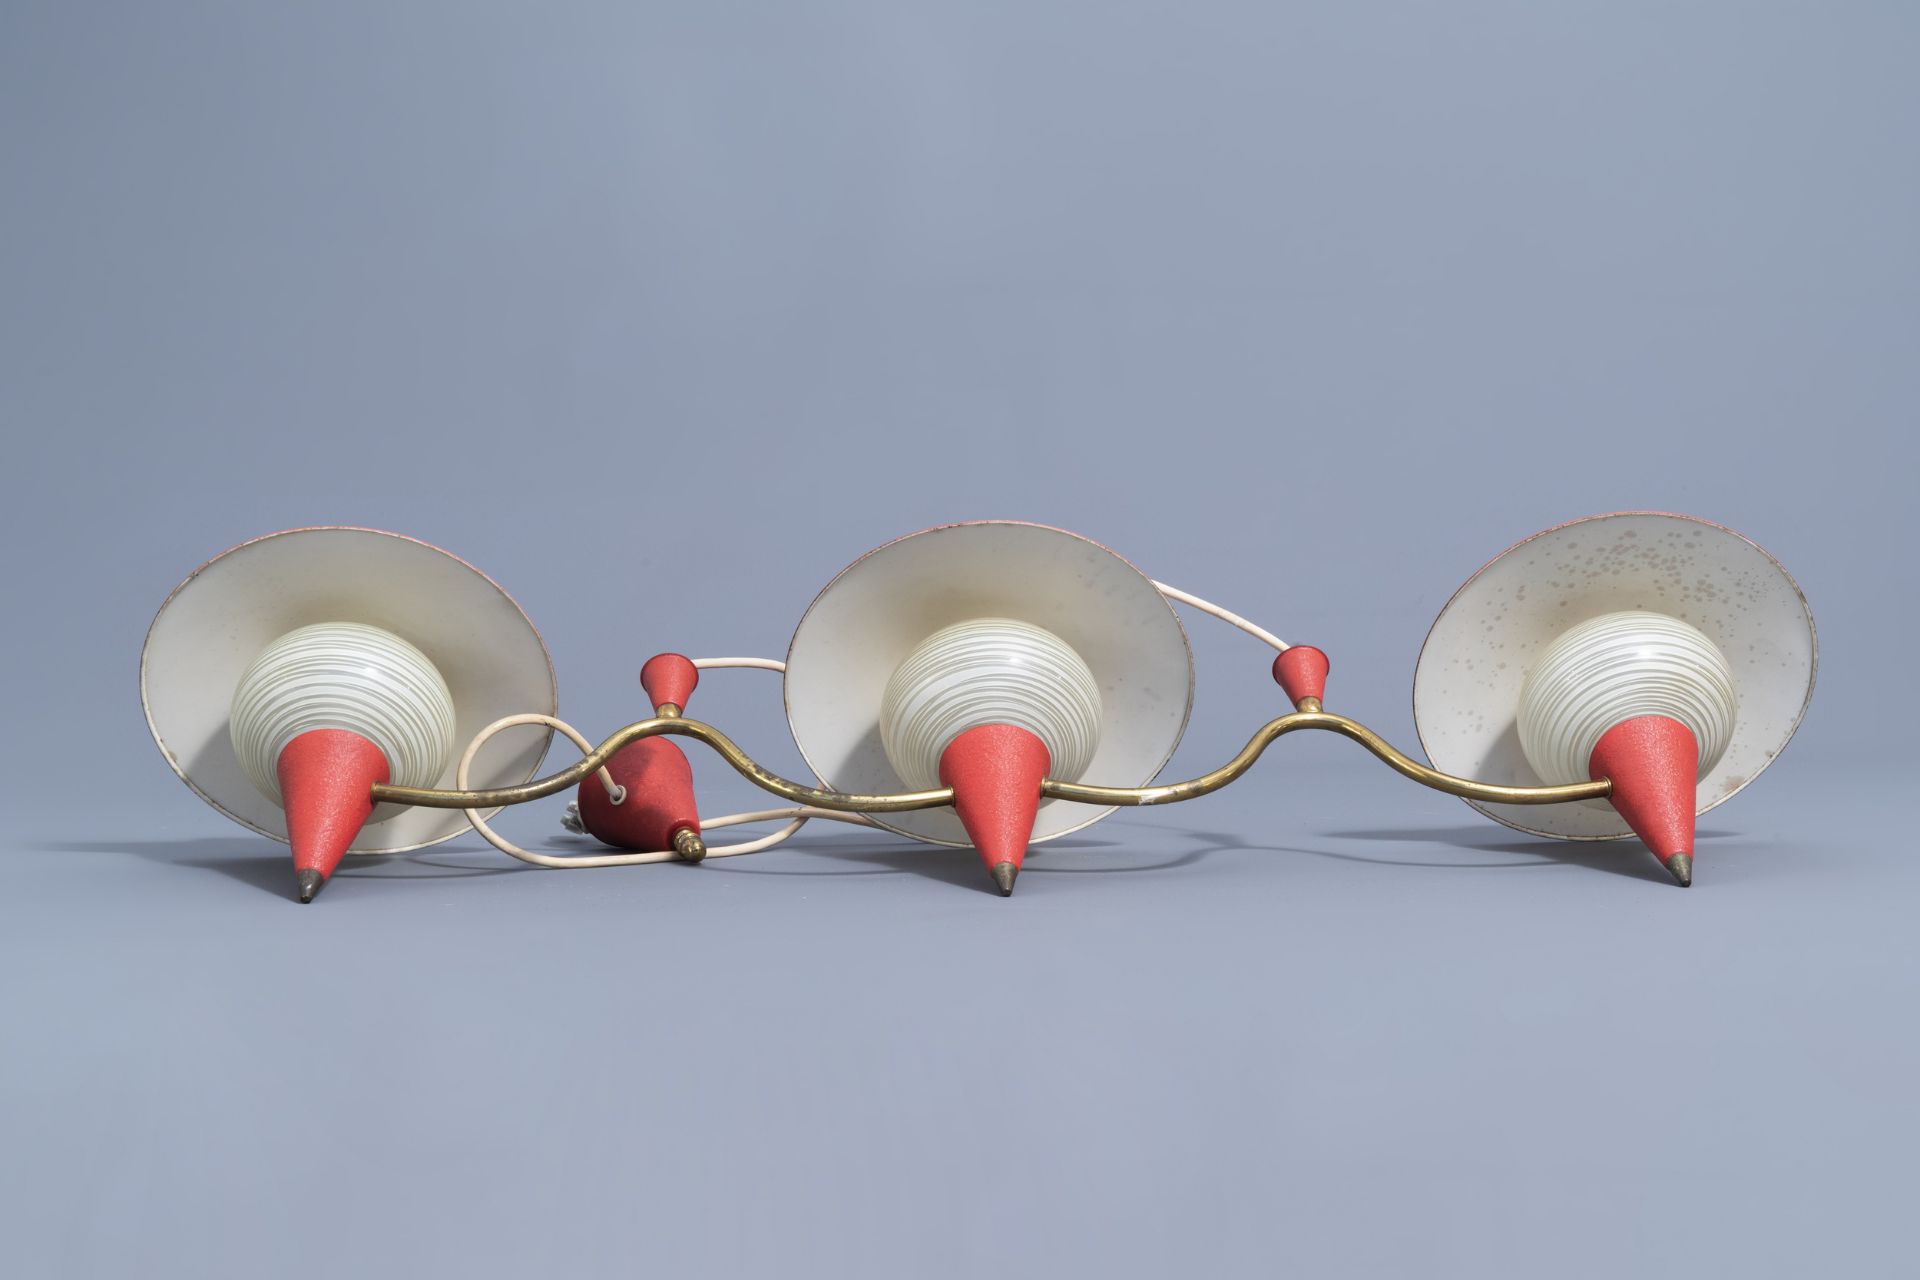 A glass and metal three-light chandelier in the manner of Jean Royere (1902-1981), 1950's-1960's - Image 3 of 3